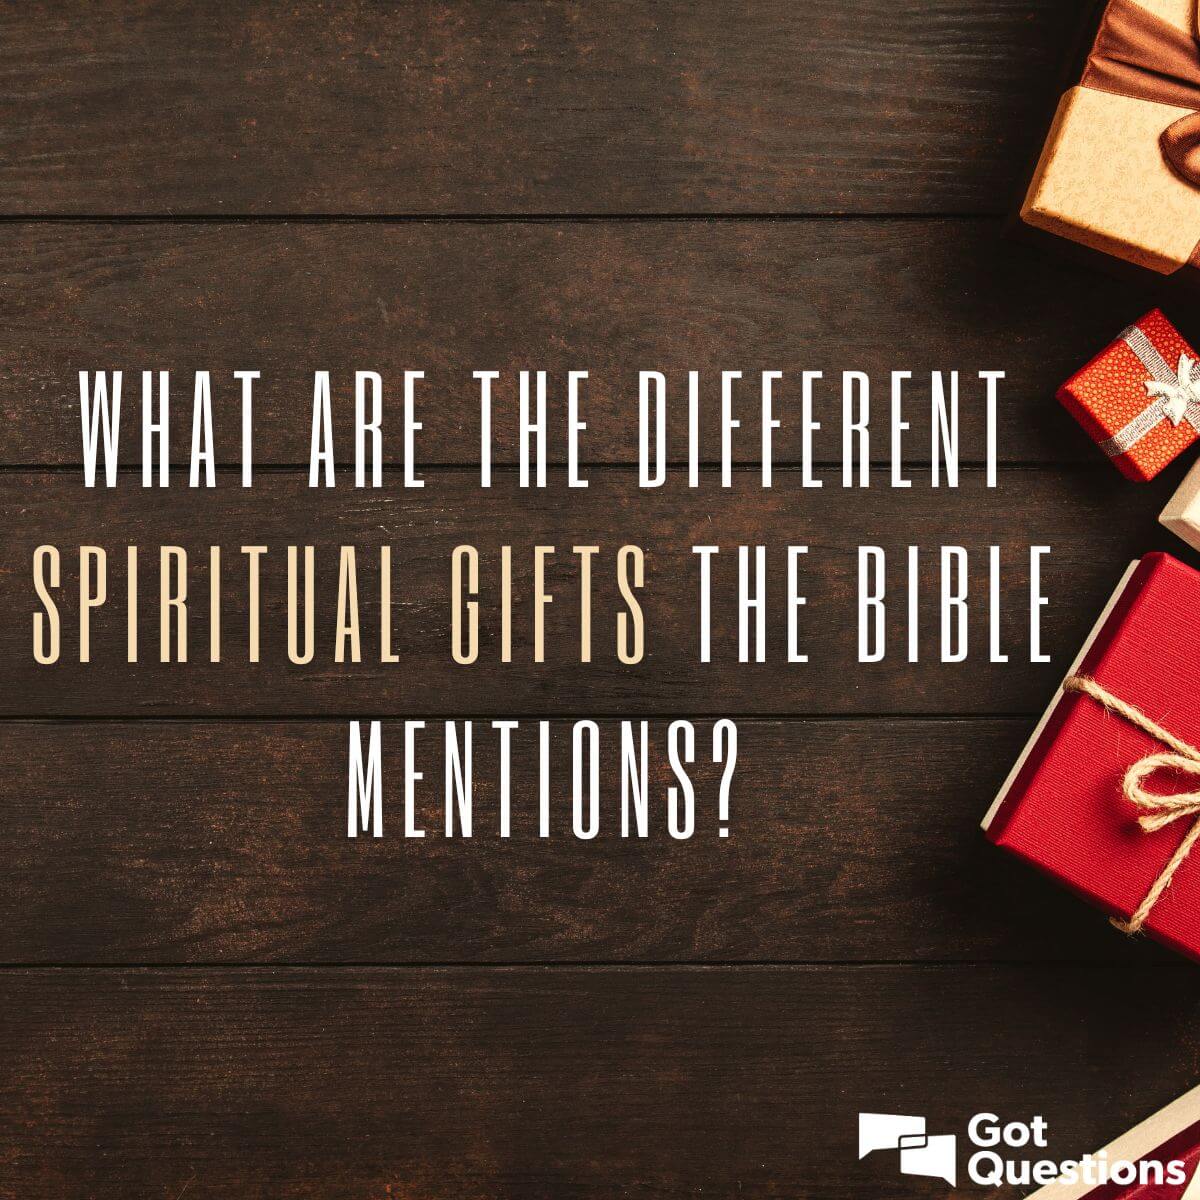 Spiritual gifts survey - what are the different spiritual gifts the Bible  mentions?